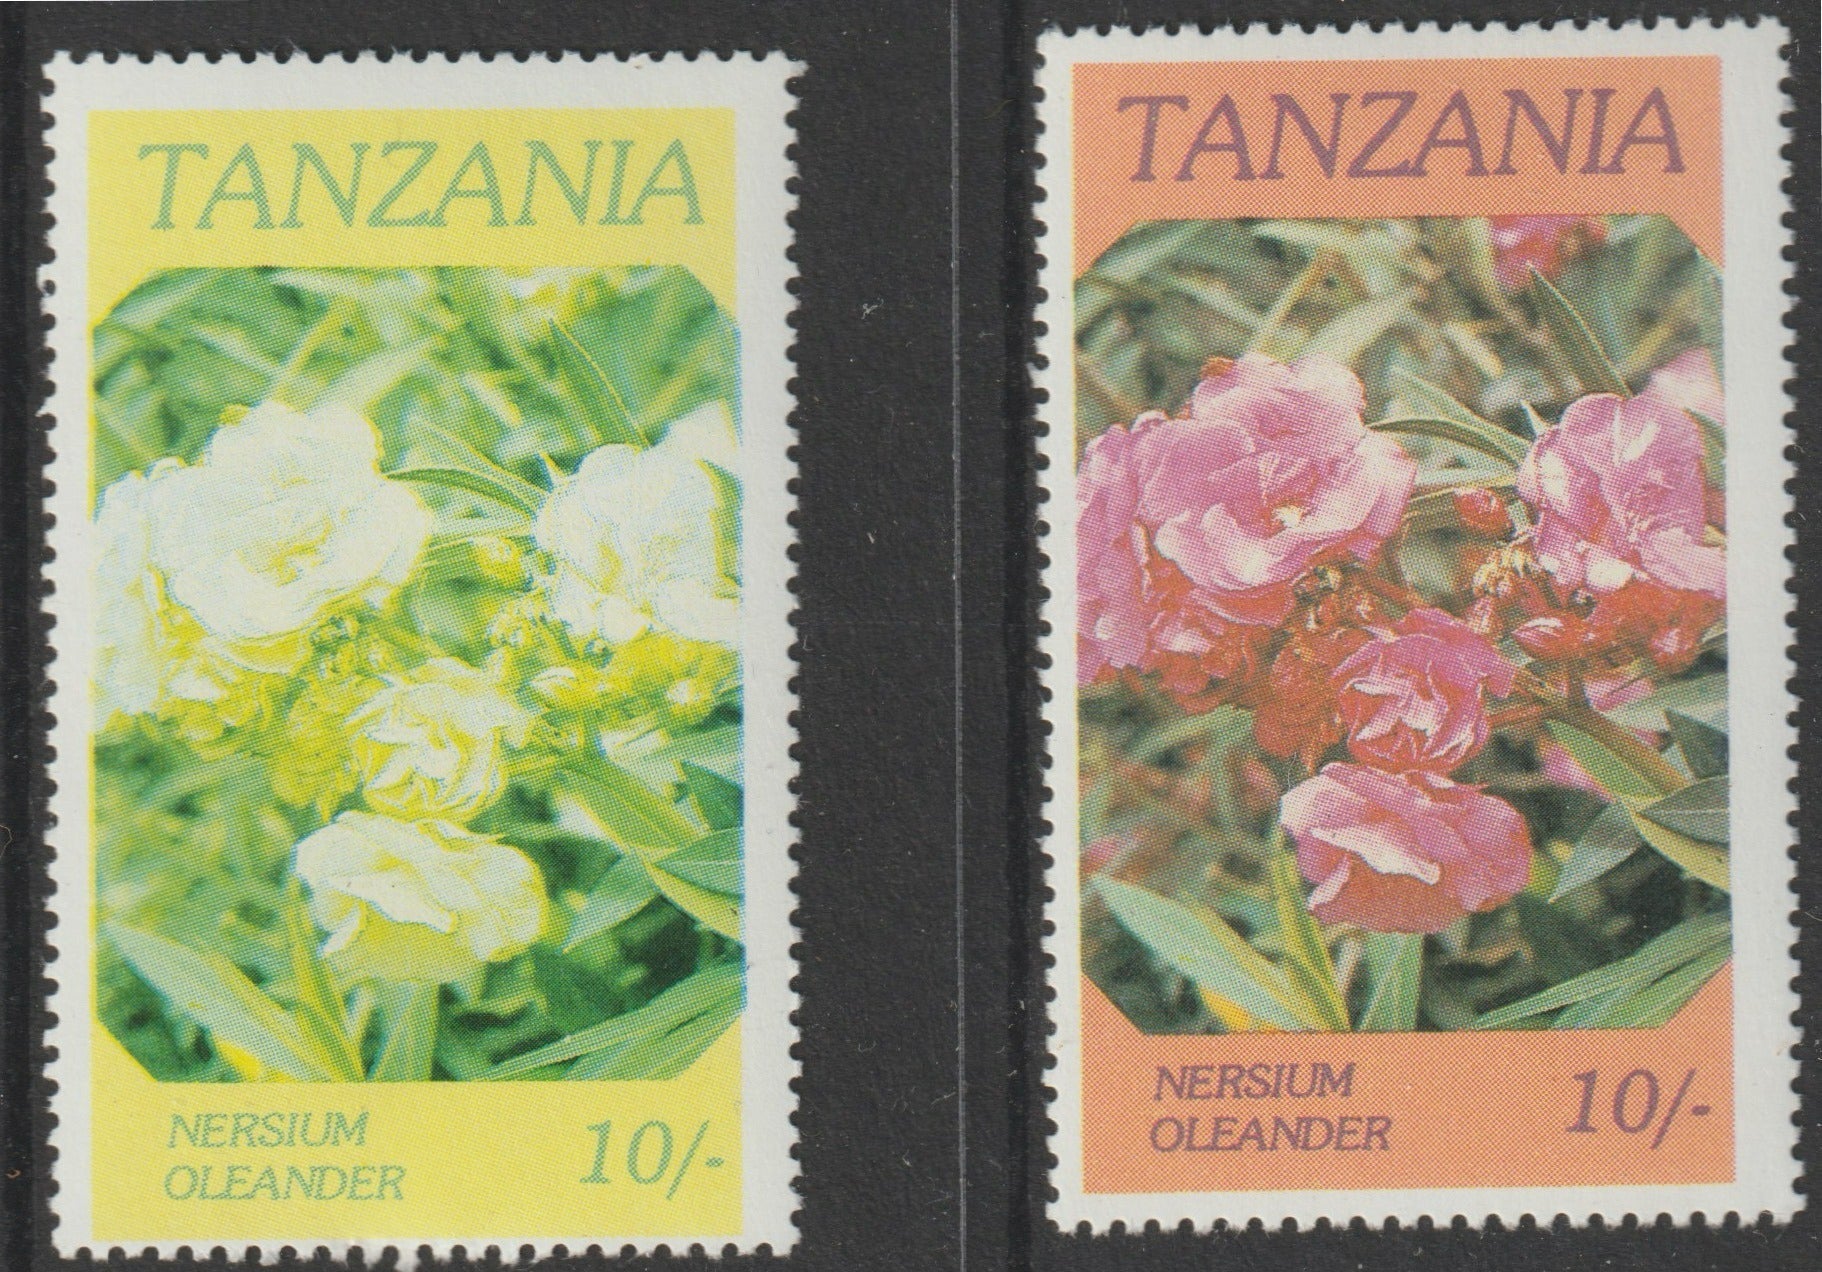 Tanzania 1986 Flowers 10s (Nersium) with red omitted, complete sheetlet of 8 plus normal sheet, both unmounted mint as SG 476